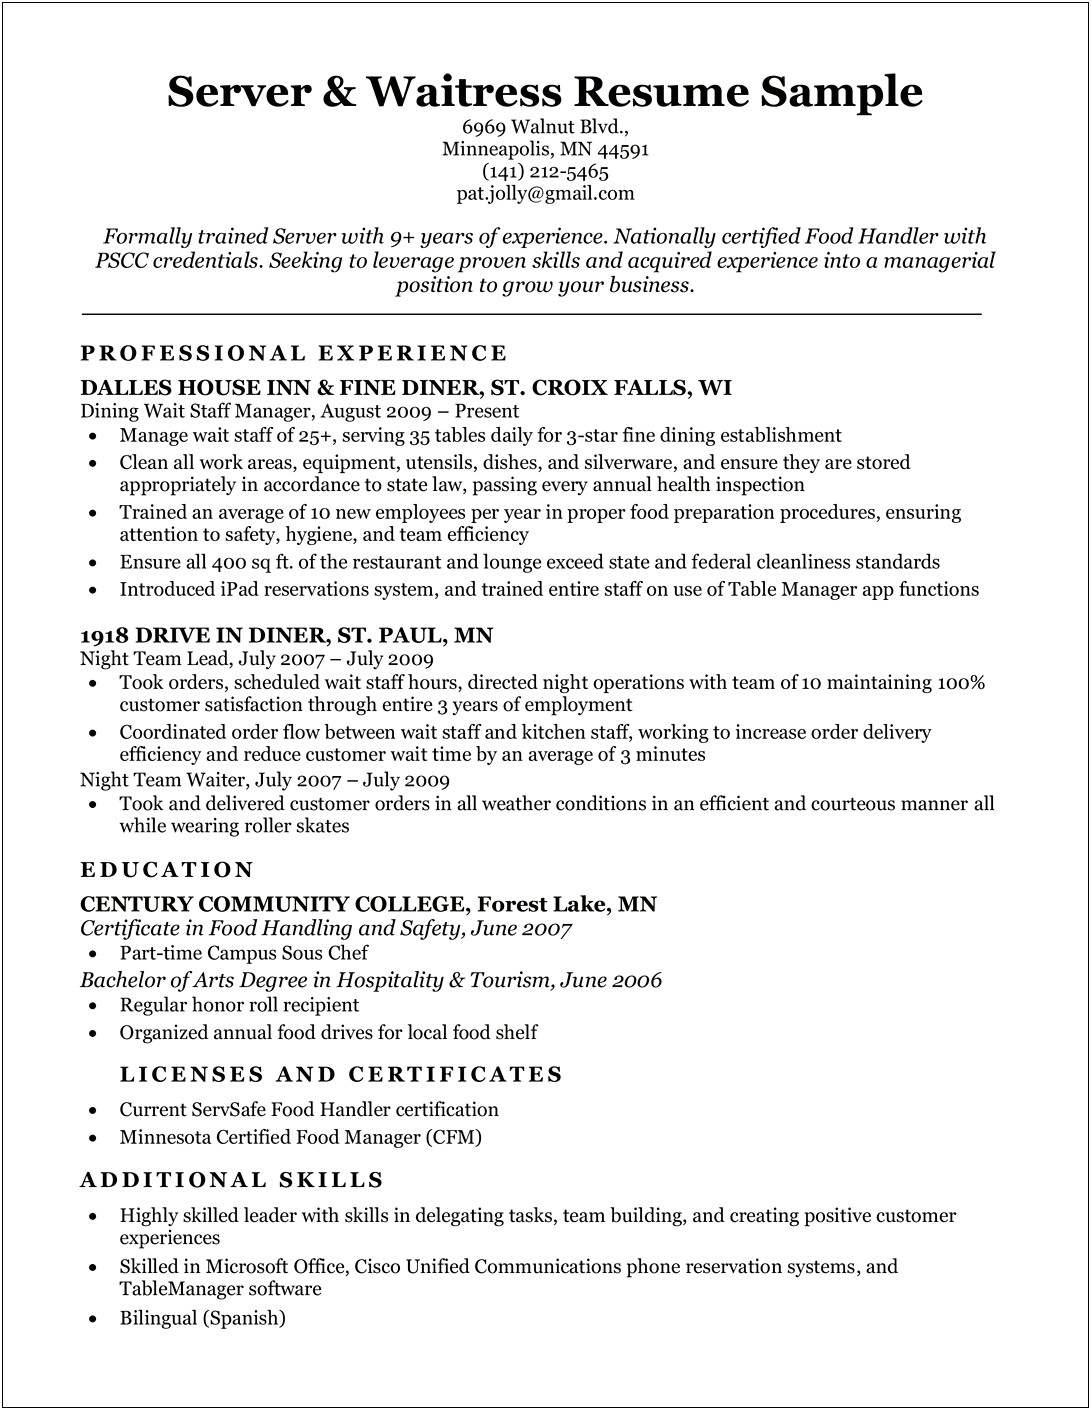 Skills Required For Food Service Resume